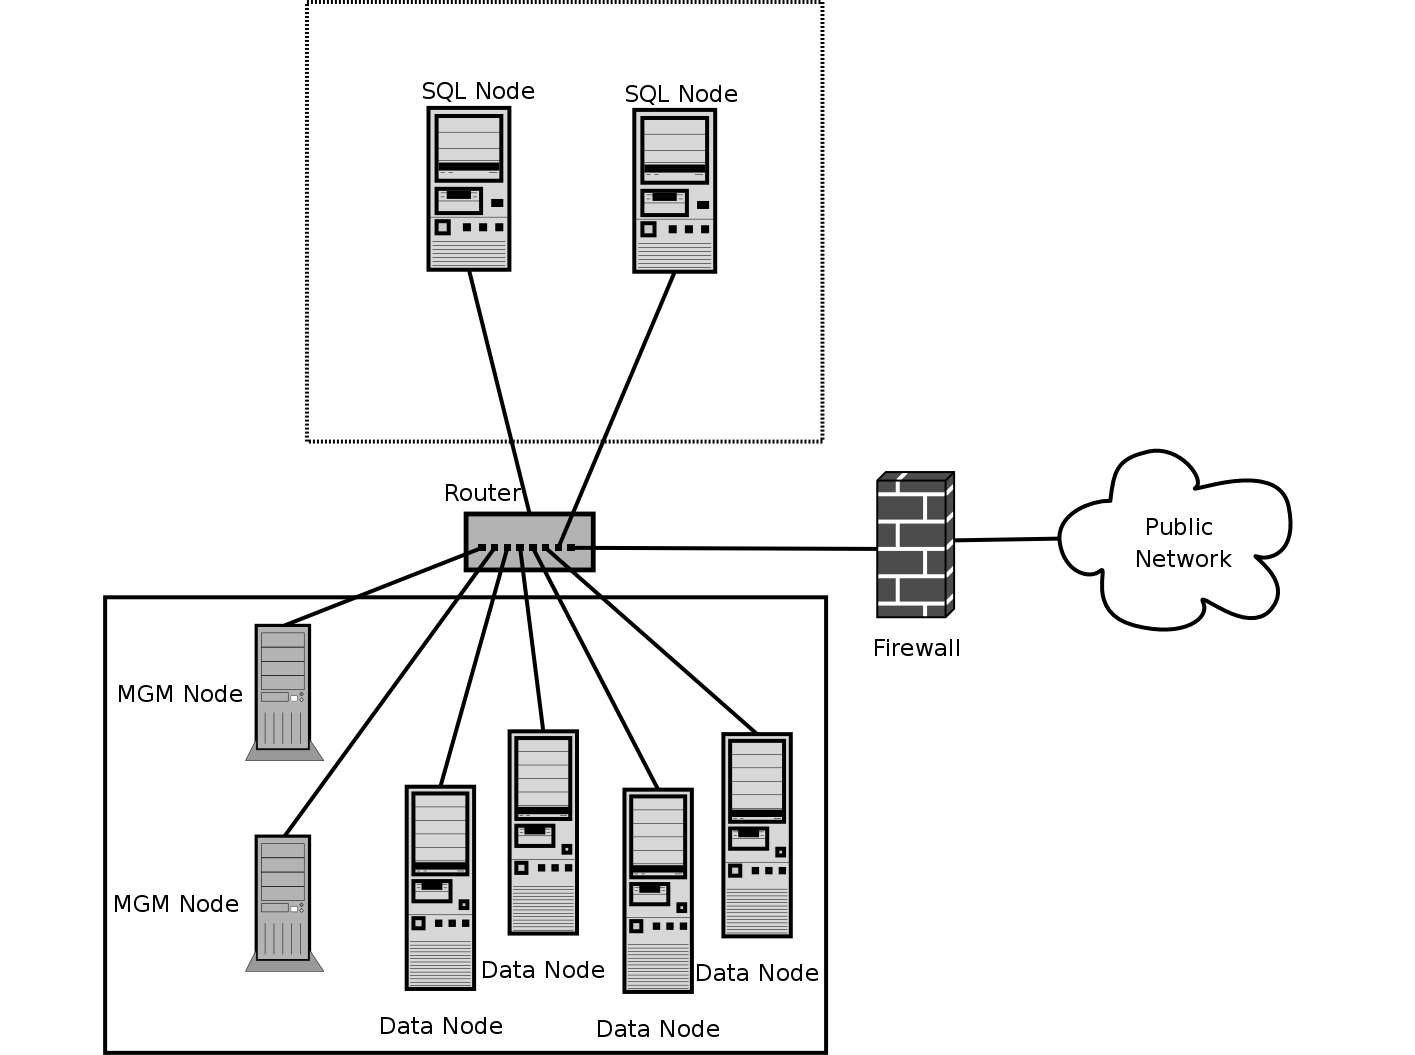 Network setup for MySQL Cluster using
                a combination of hardware and software firewalls to
                provide protection